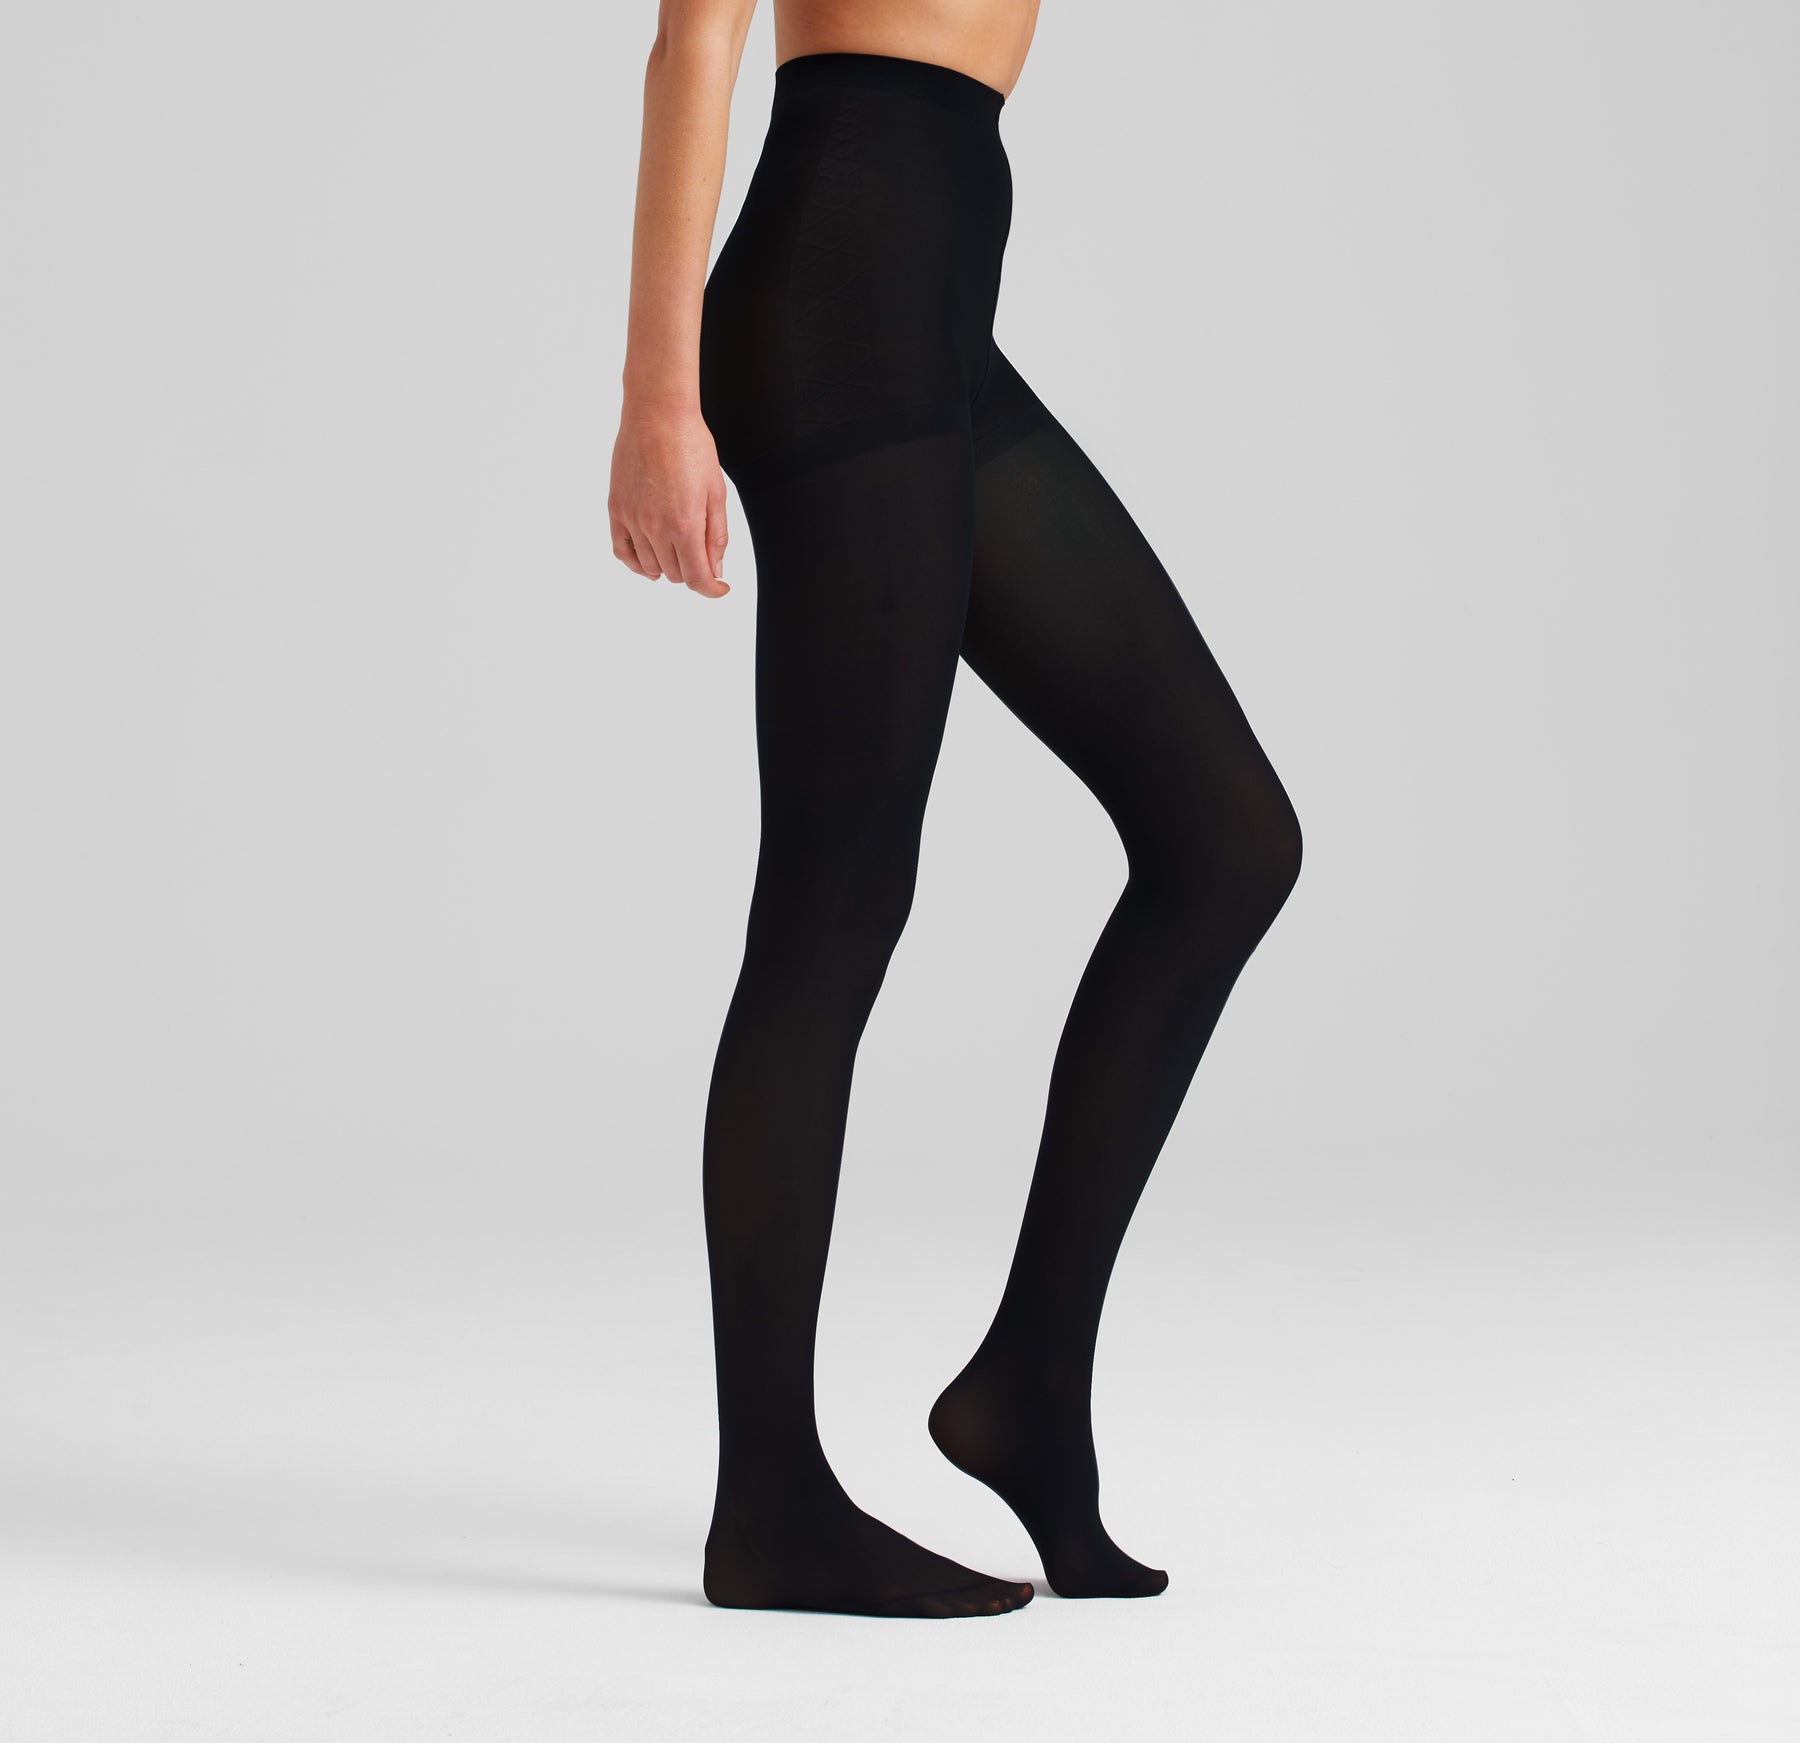 Charnos BioDegradable 80 Denier Opaque Control Top Tights - The Shaper –  Simply Hosiery Online